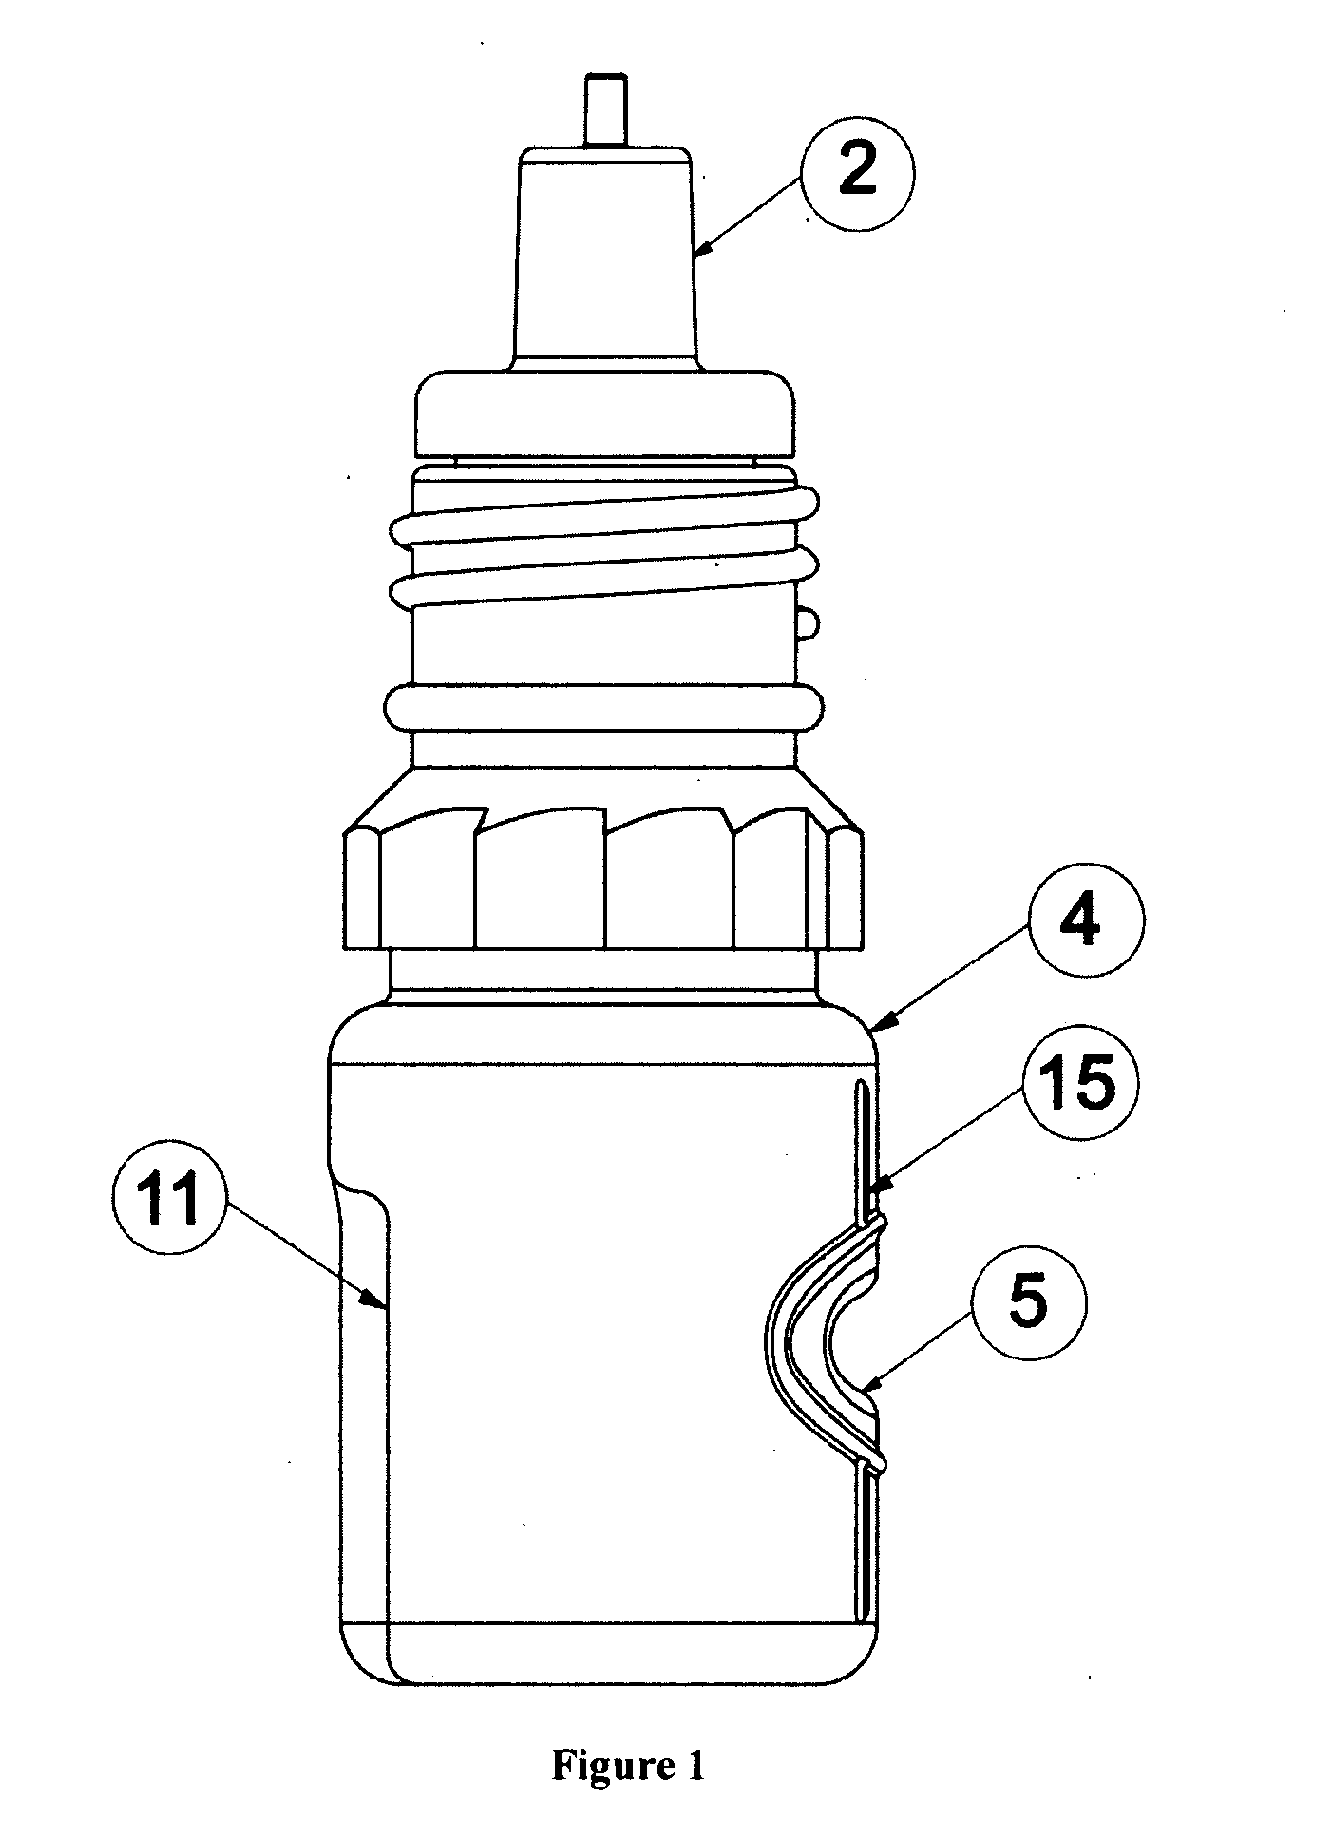 Metered drop bottle for dispensing microliter amounts of a liquid in the form of a drop